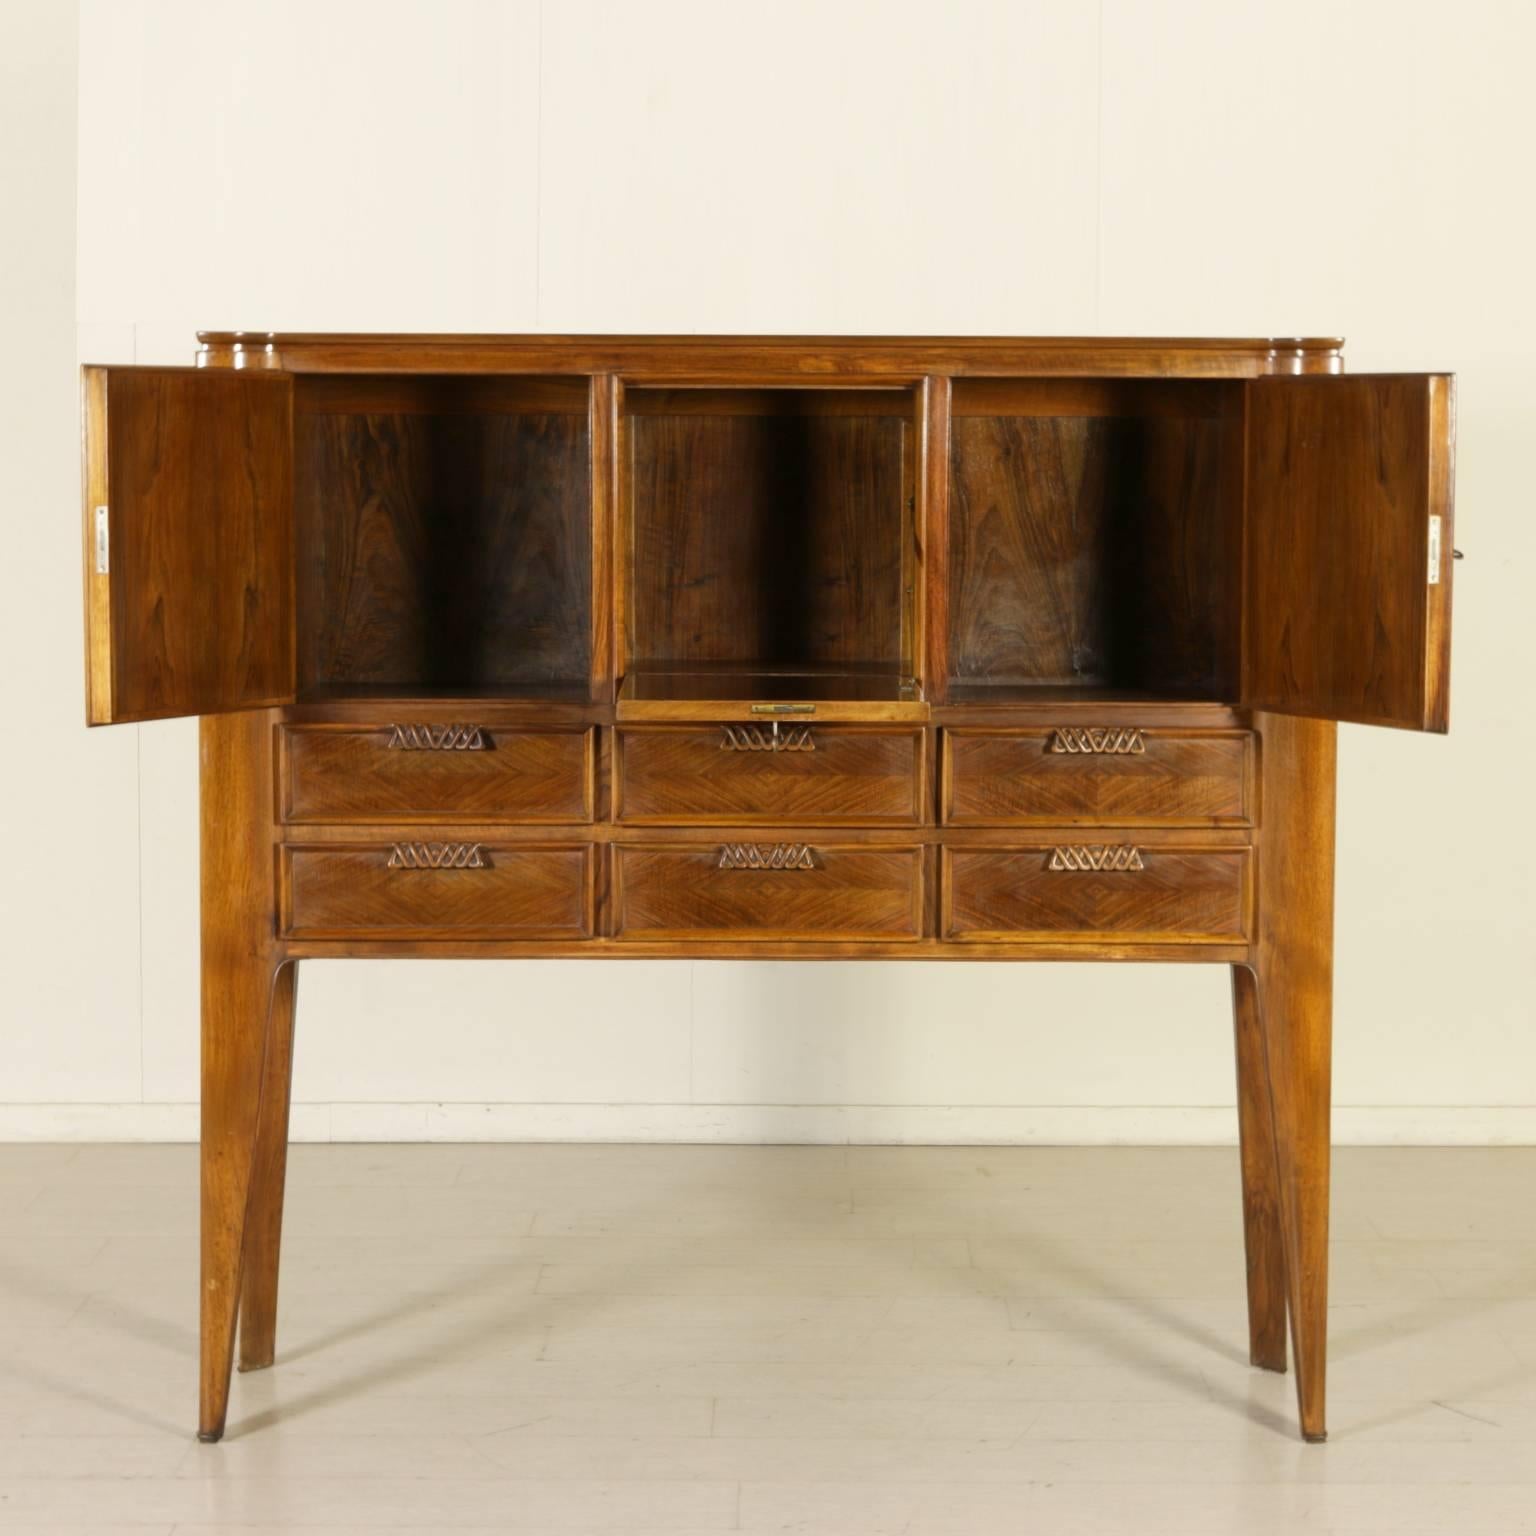 Swinging cabinet with drawers, root veneered wood, handles in carved wood. Manufactured in Italy, 1950s.